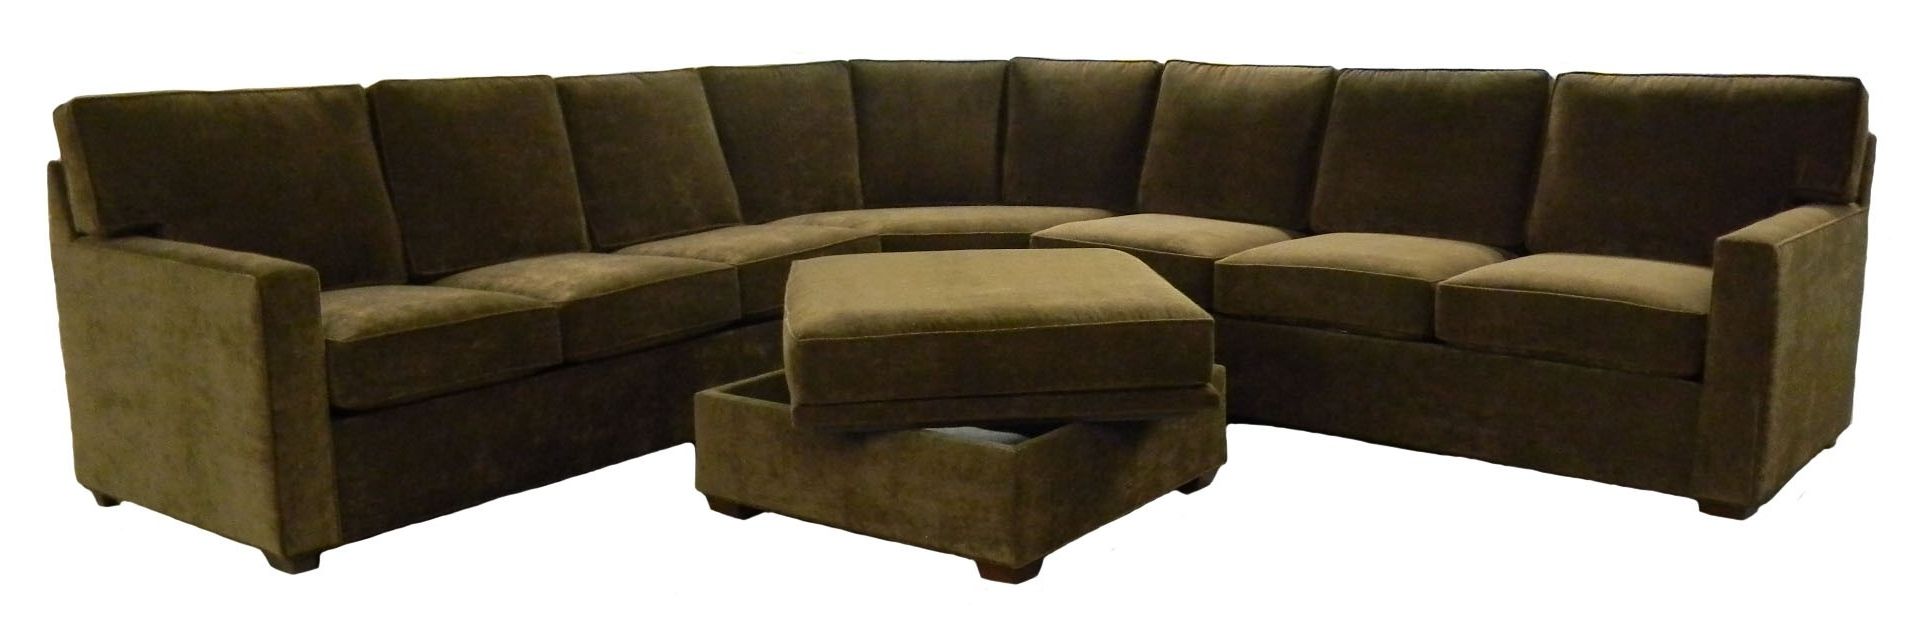 Lovely Customizable Sectional Sofa – Buildsimplehome Within Most Current Customizable Sectional Sofas (Photo 14 of 15)